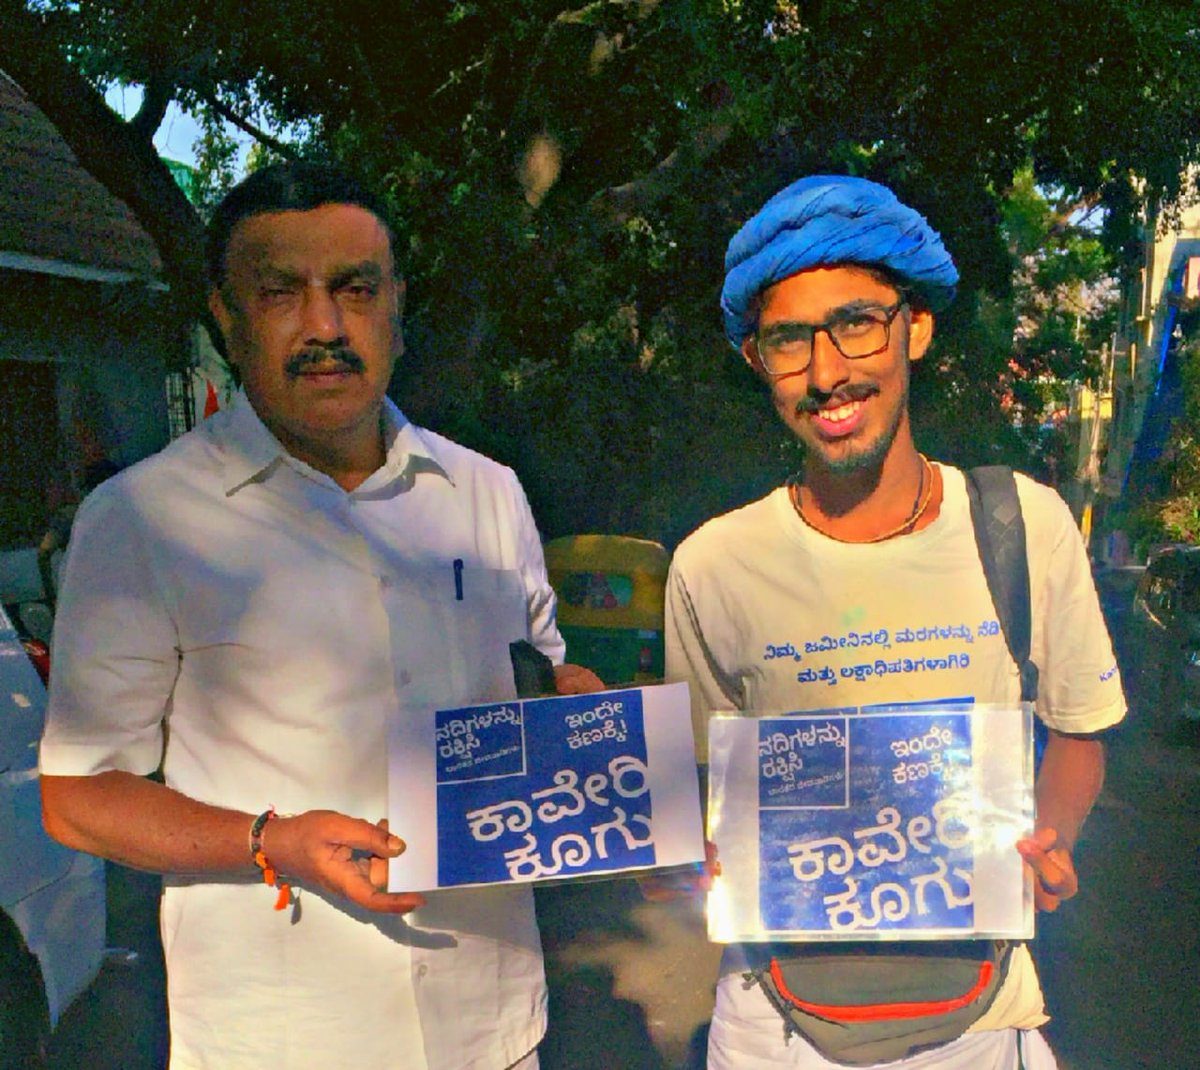 Yashas is doing bare foot padyatra from Thala Cauvery to sea shore poomphur to spread awareness of #CauveryCalling. Many politicians, celebrities are supporting saving Cauvery project. Ravi Subramanya MLA of Basavangudi, is supporting whole heartedly. #SaveSoil